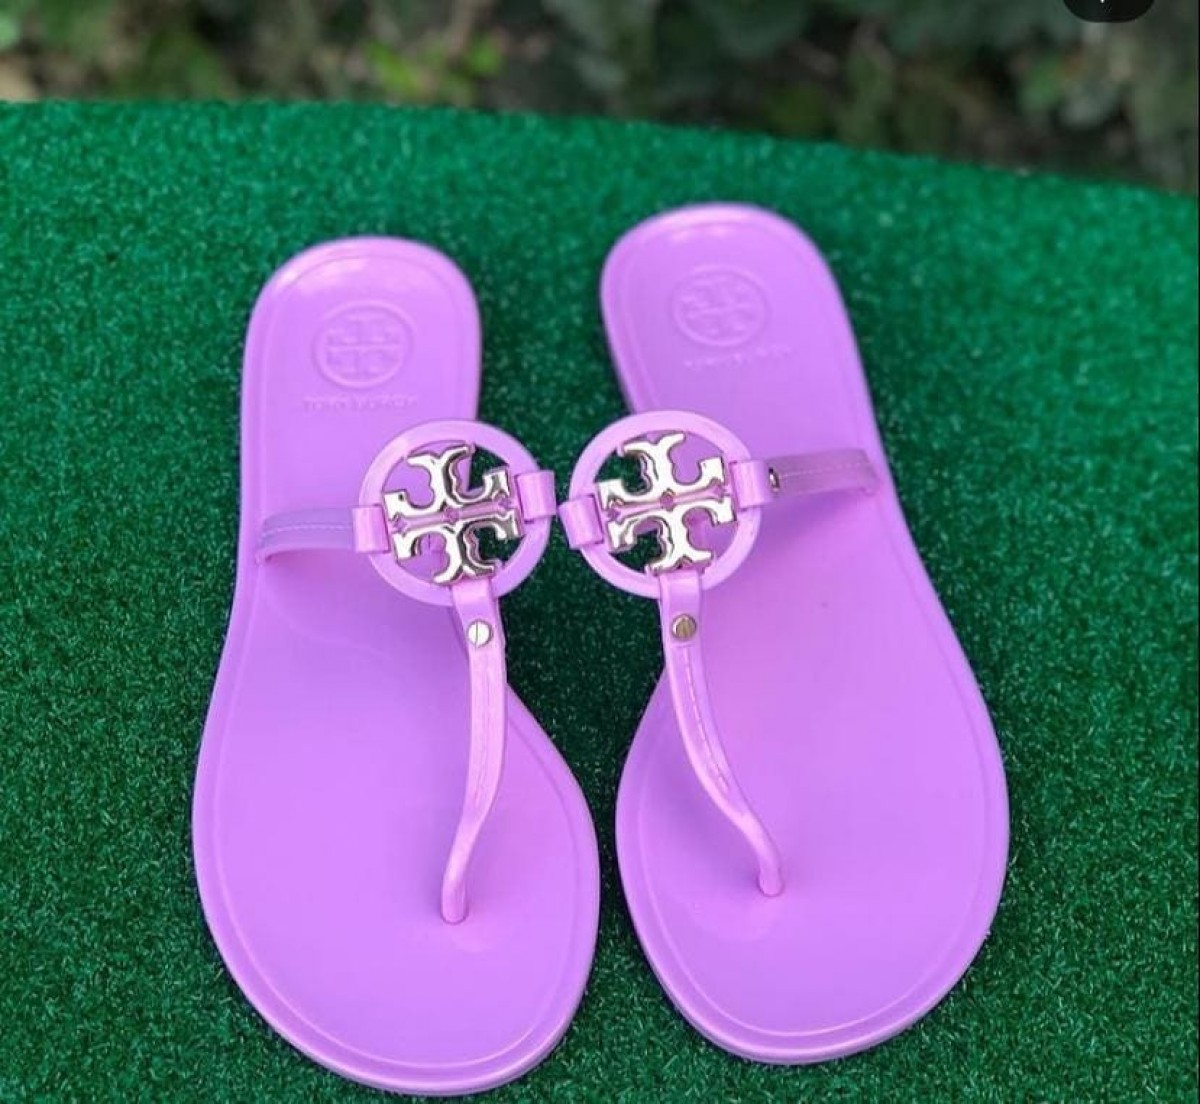 Tory Burch Slippers for sale in Mandeville Manchester - Women's Shoes